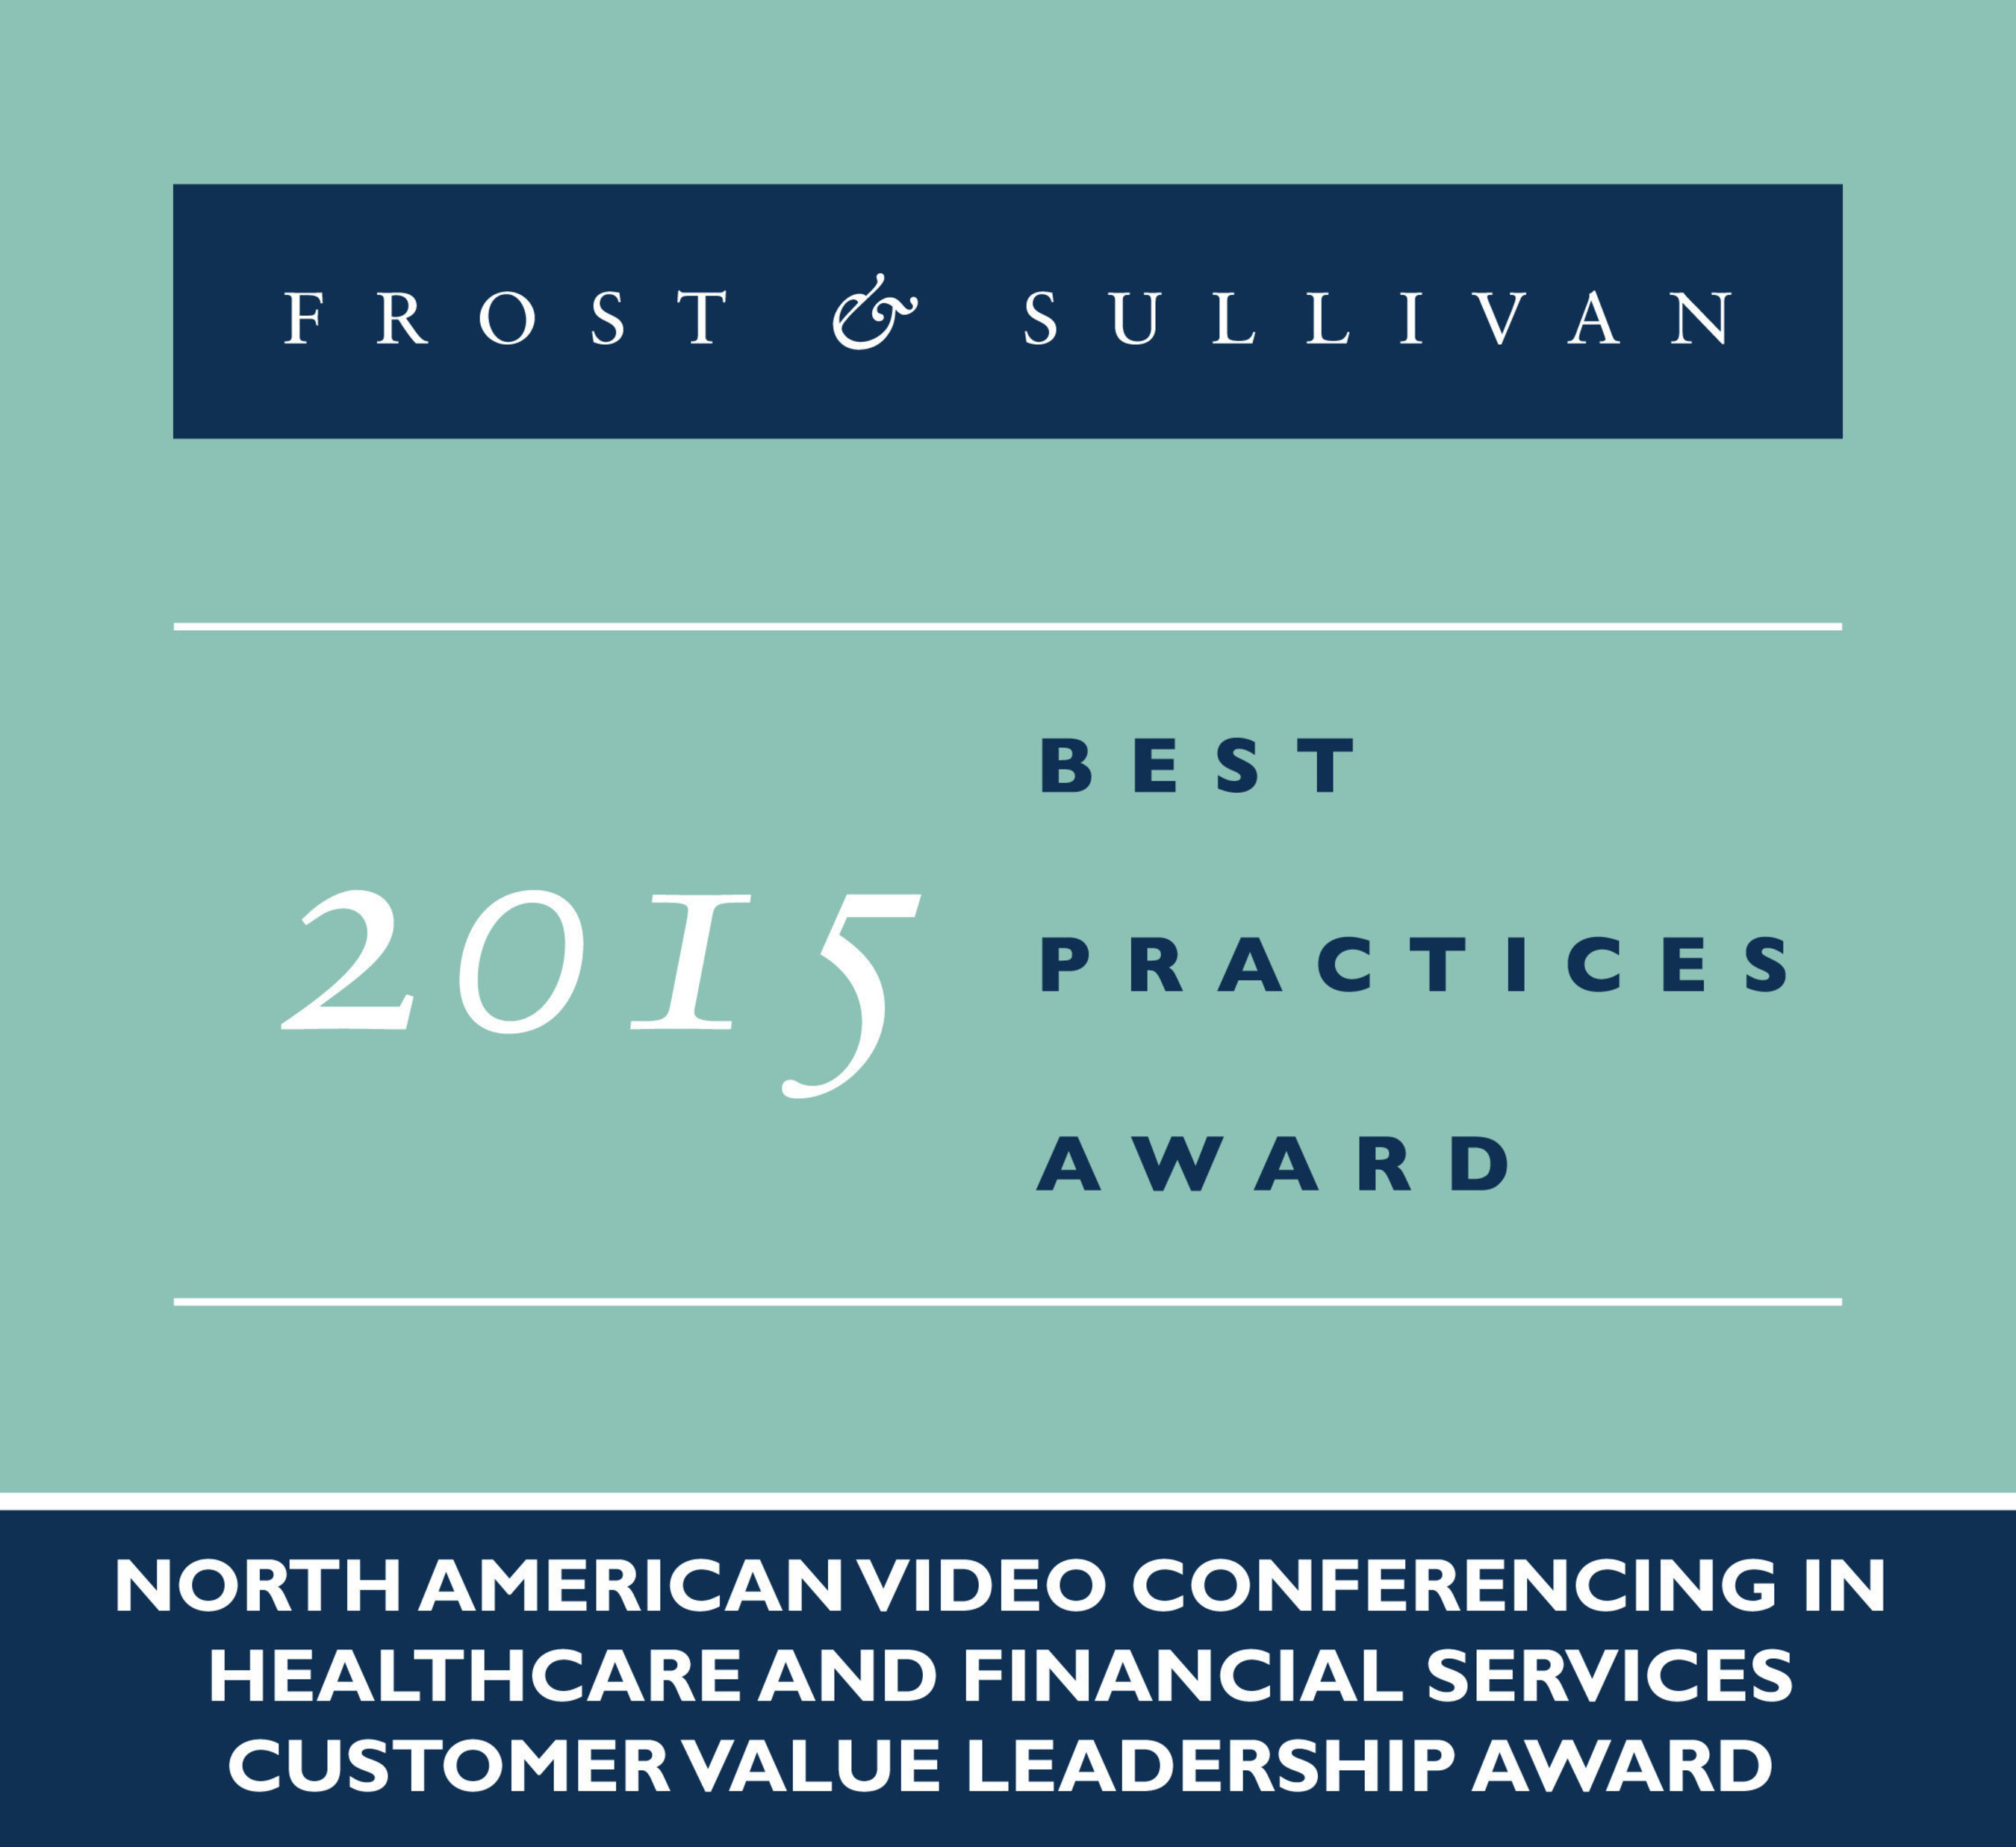 Vidyo receives the 2015 North American Video Conferencing in Healthcare and Financial Services Customer Value Leadership Award